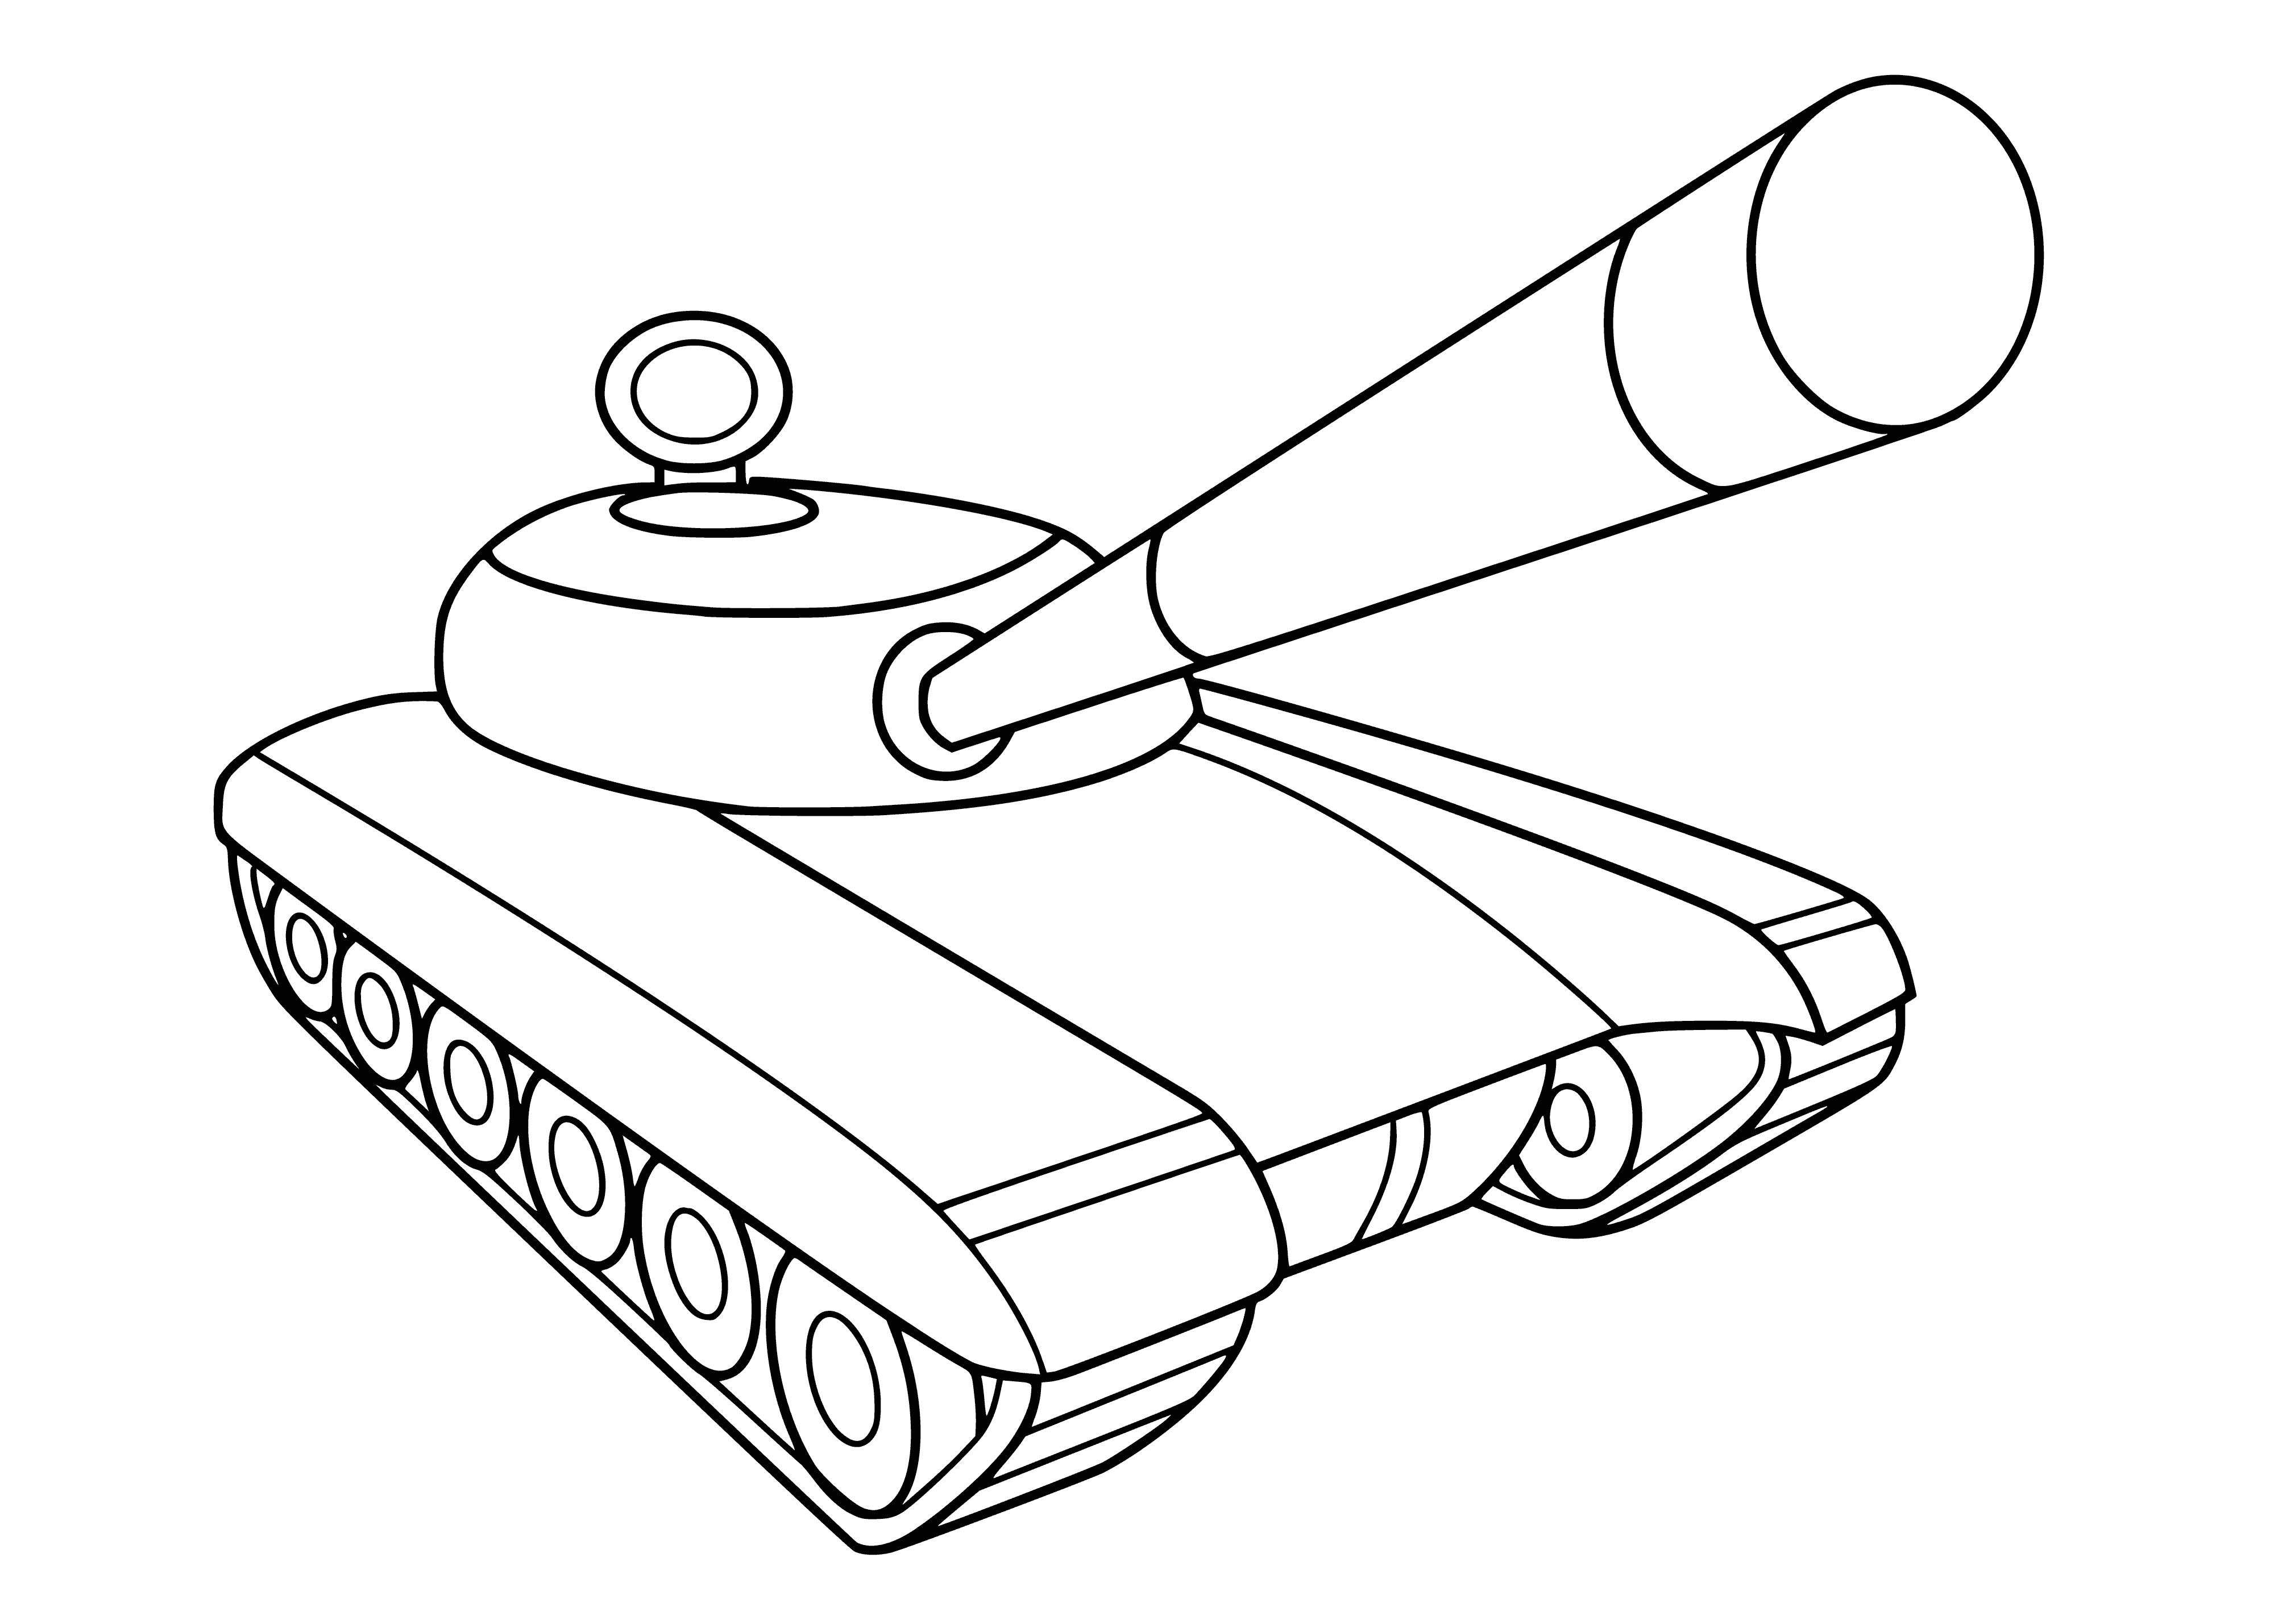 coloring page: Two large gray tanks stand side-by-side, each with a round dome and ladder ascending one.